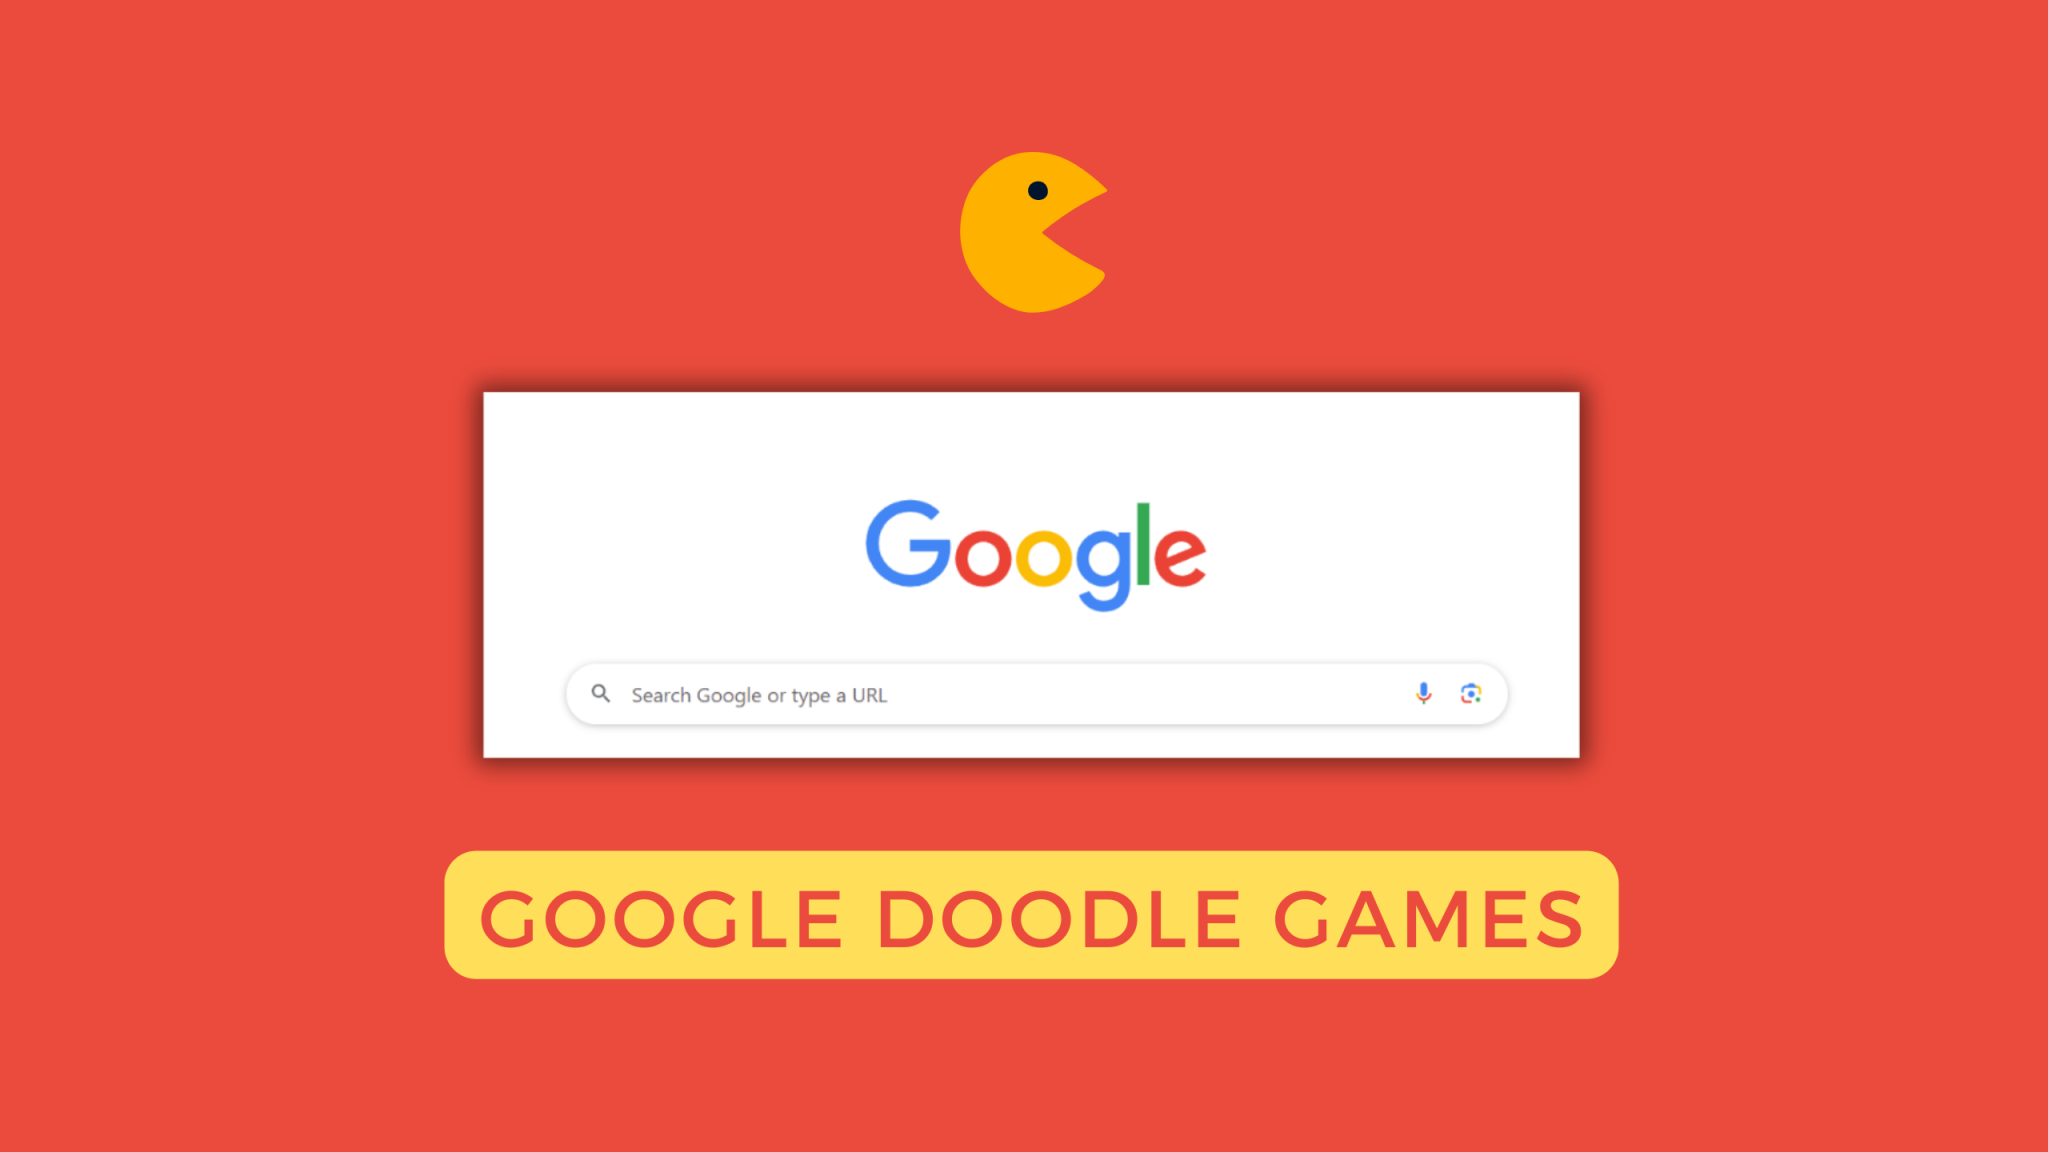 30 Popular Google Doodle Games To Play Now - Tech Simplest